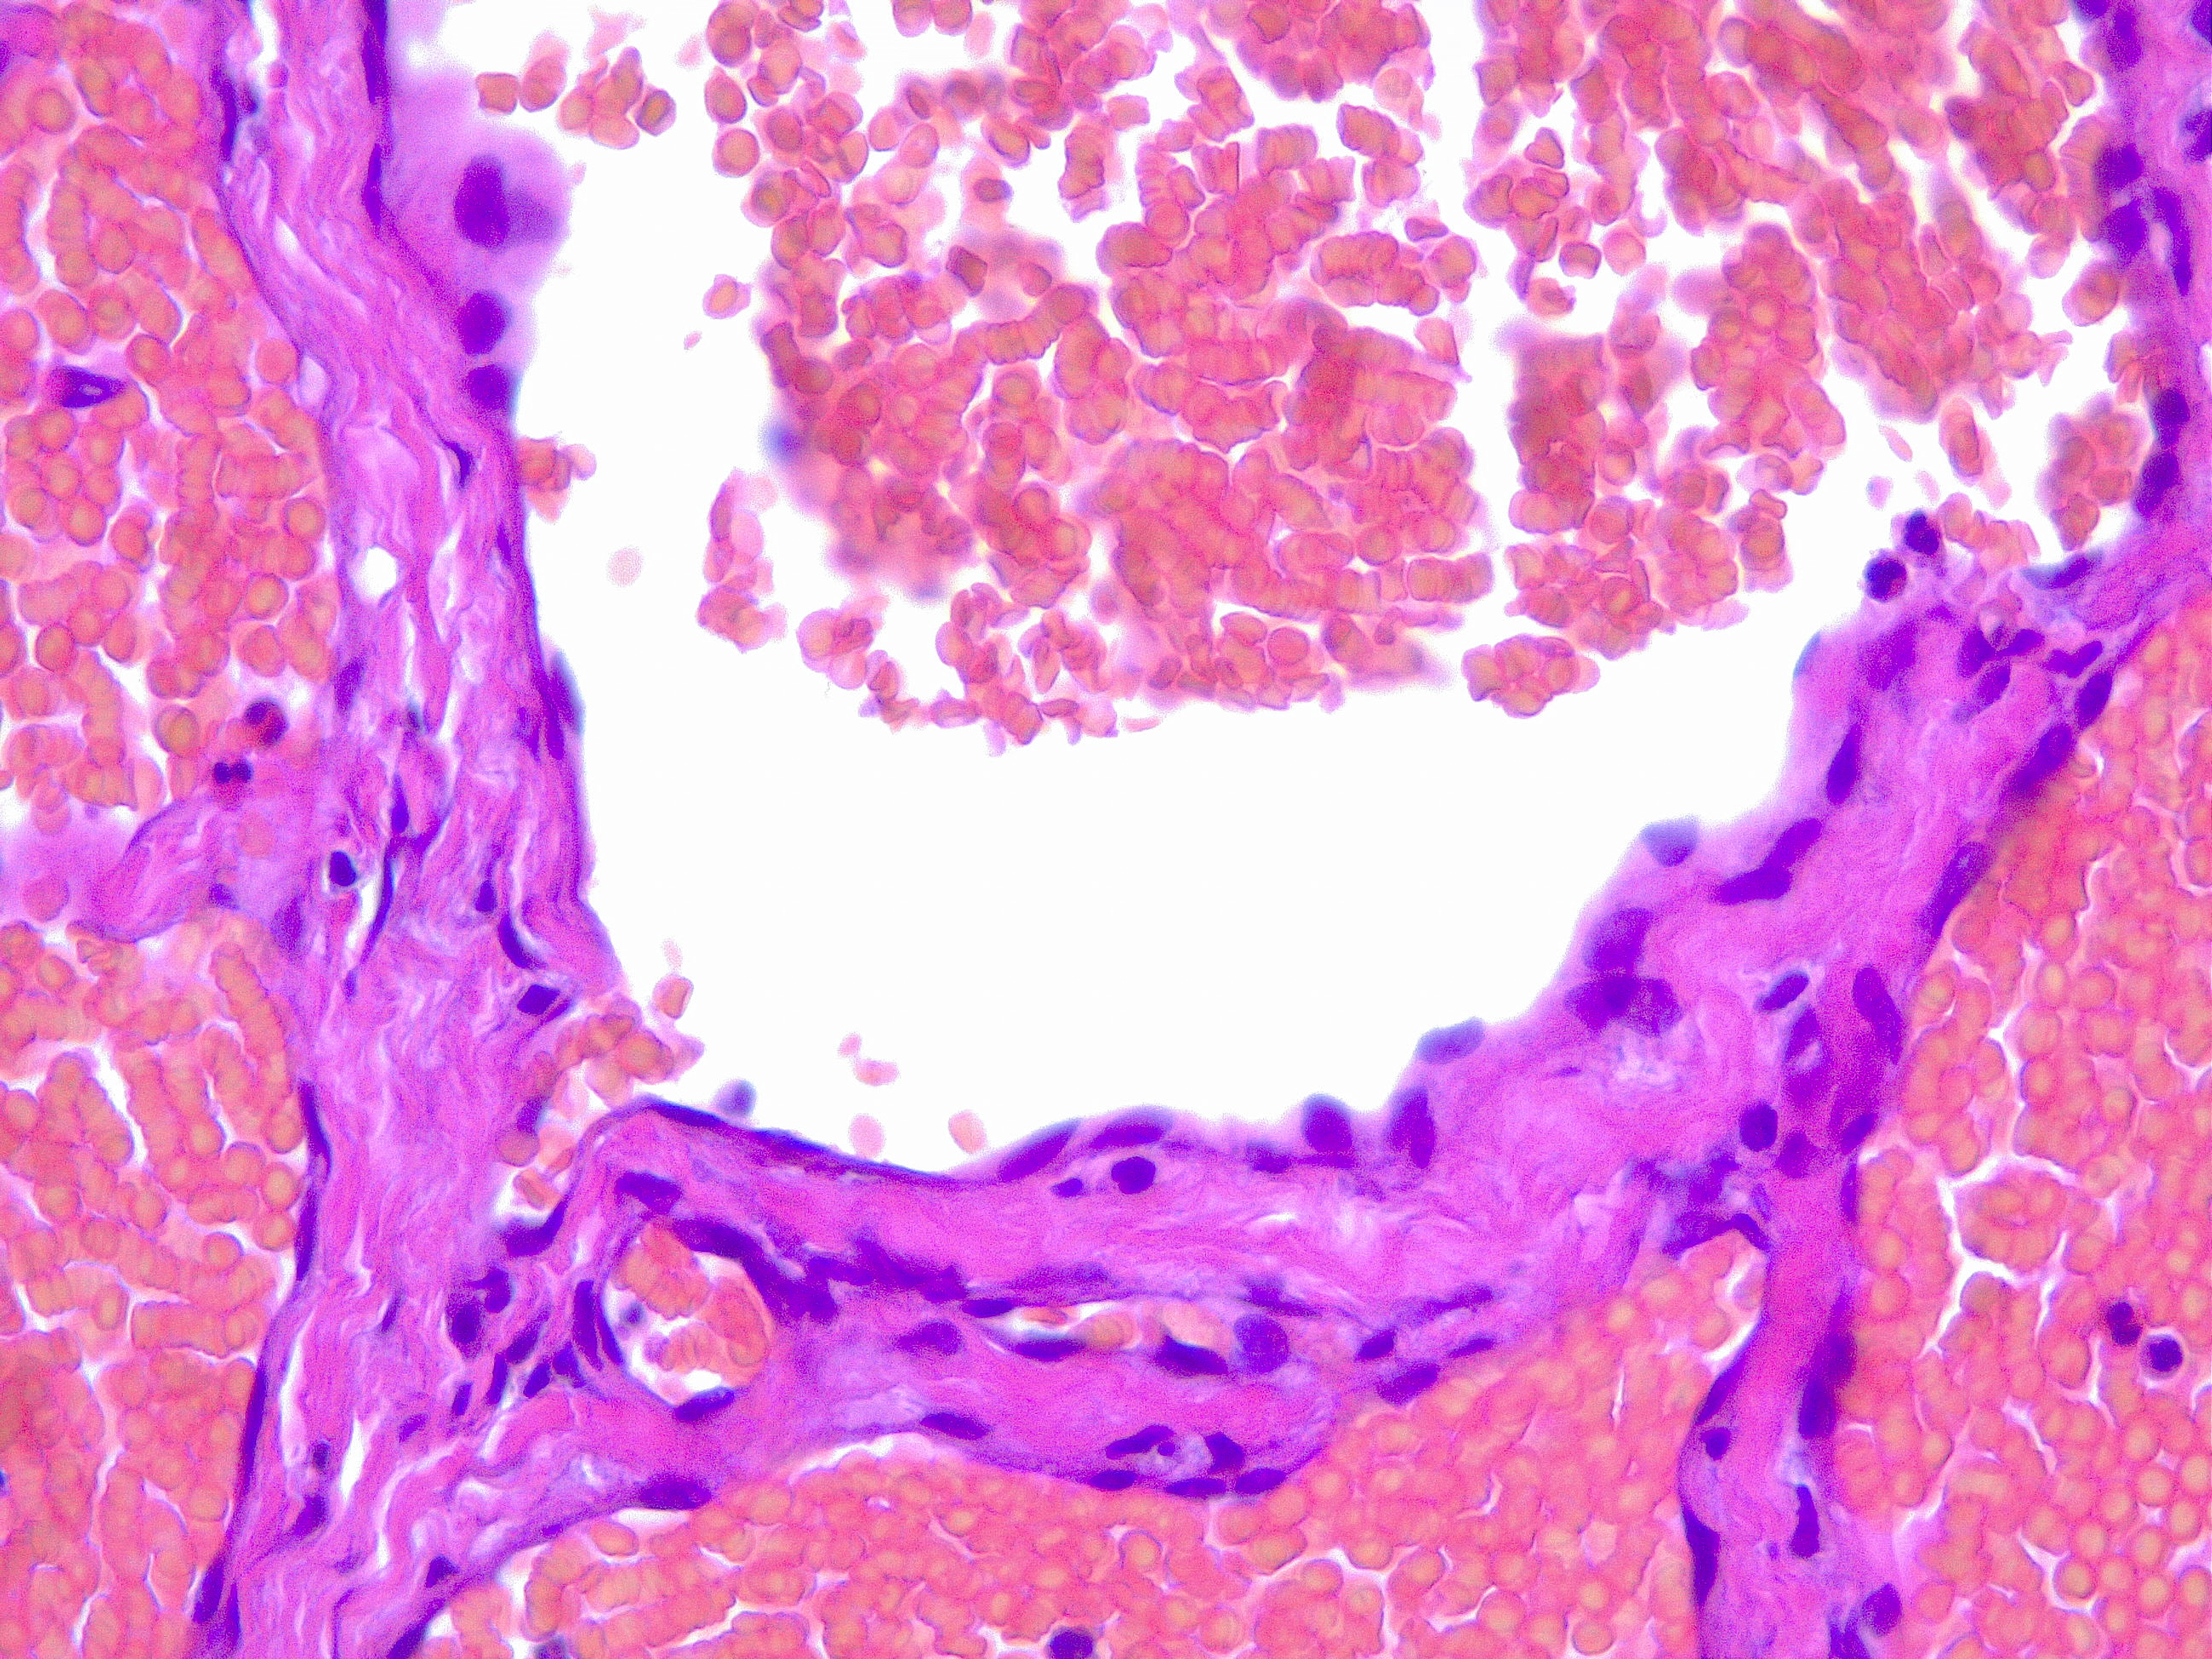 Hemangioma, H/E 20x. The image shows flattened endothelium lining a dilated vessel, engorged with erythrocytes.